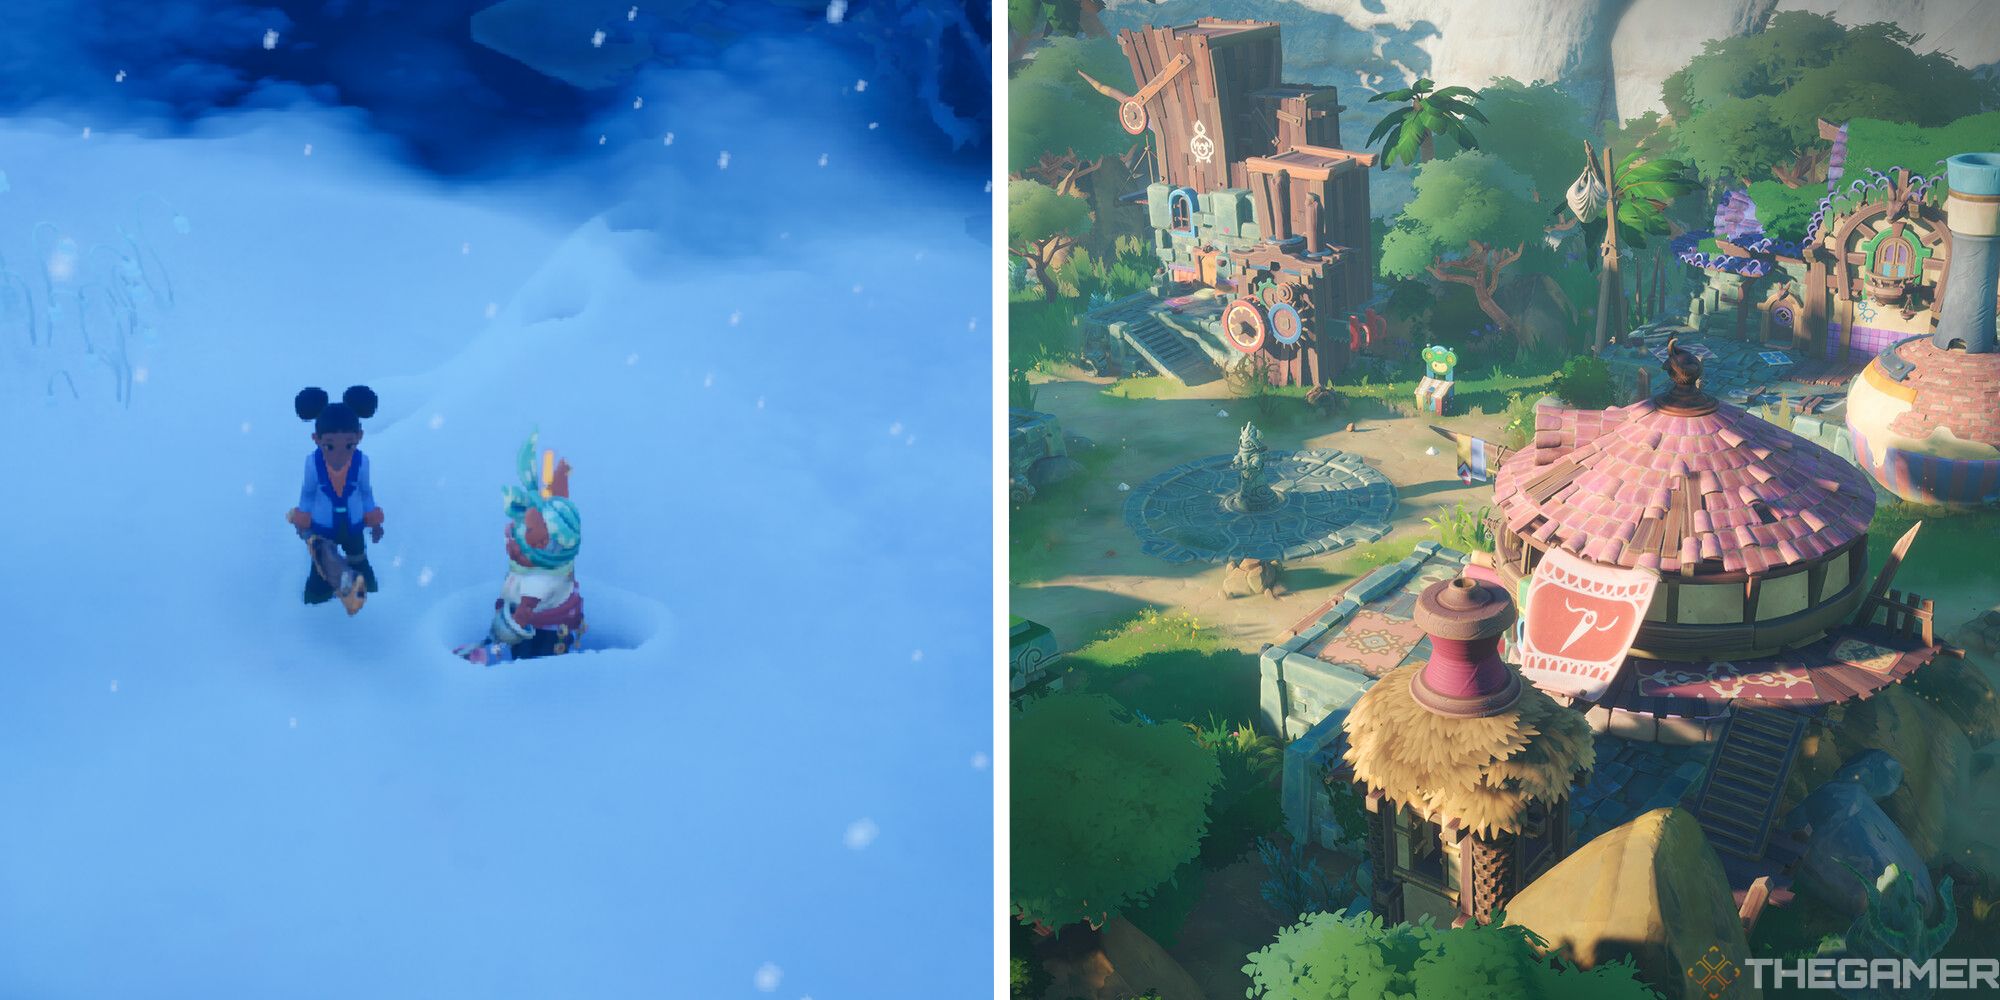 image of player and fiola next to image of upgraded plaza